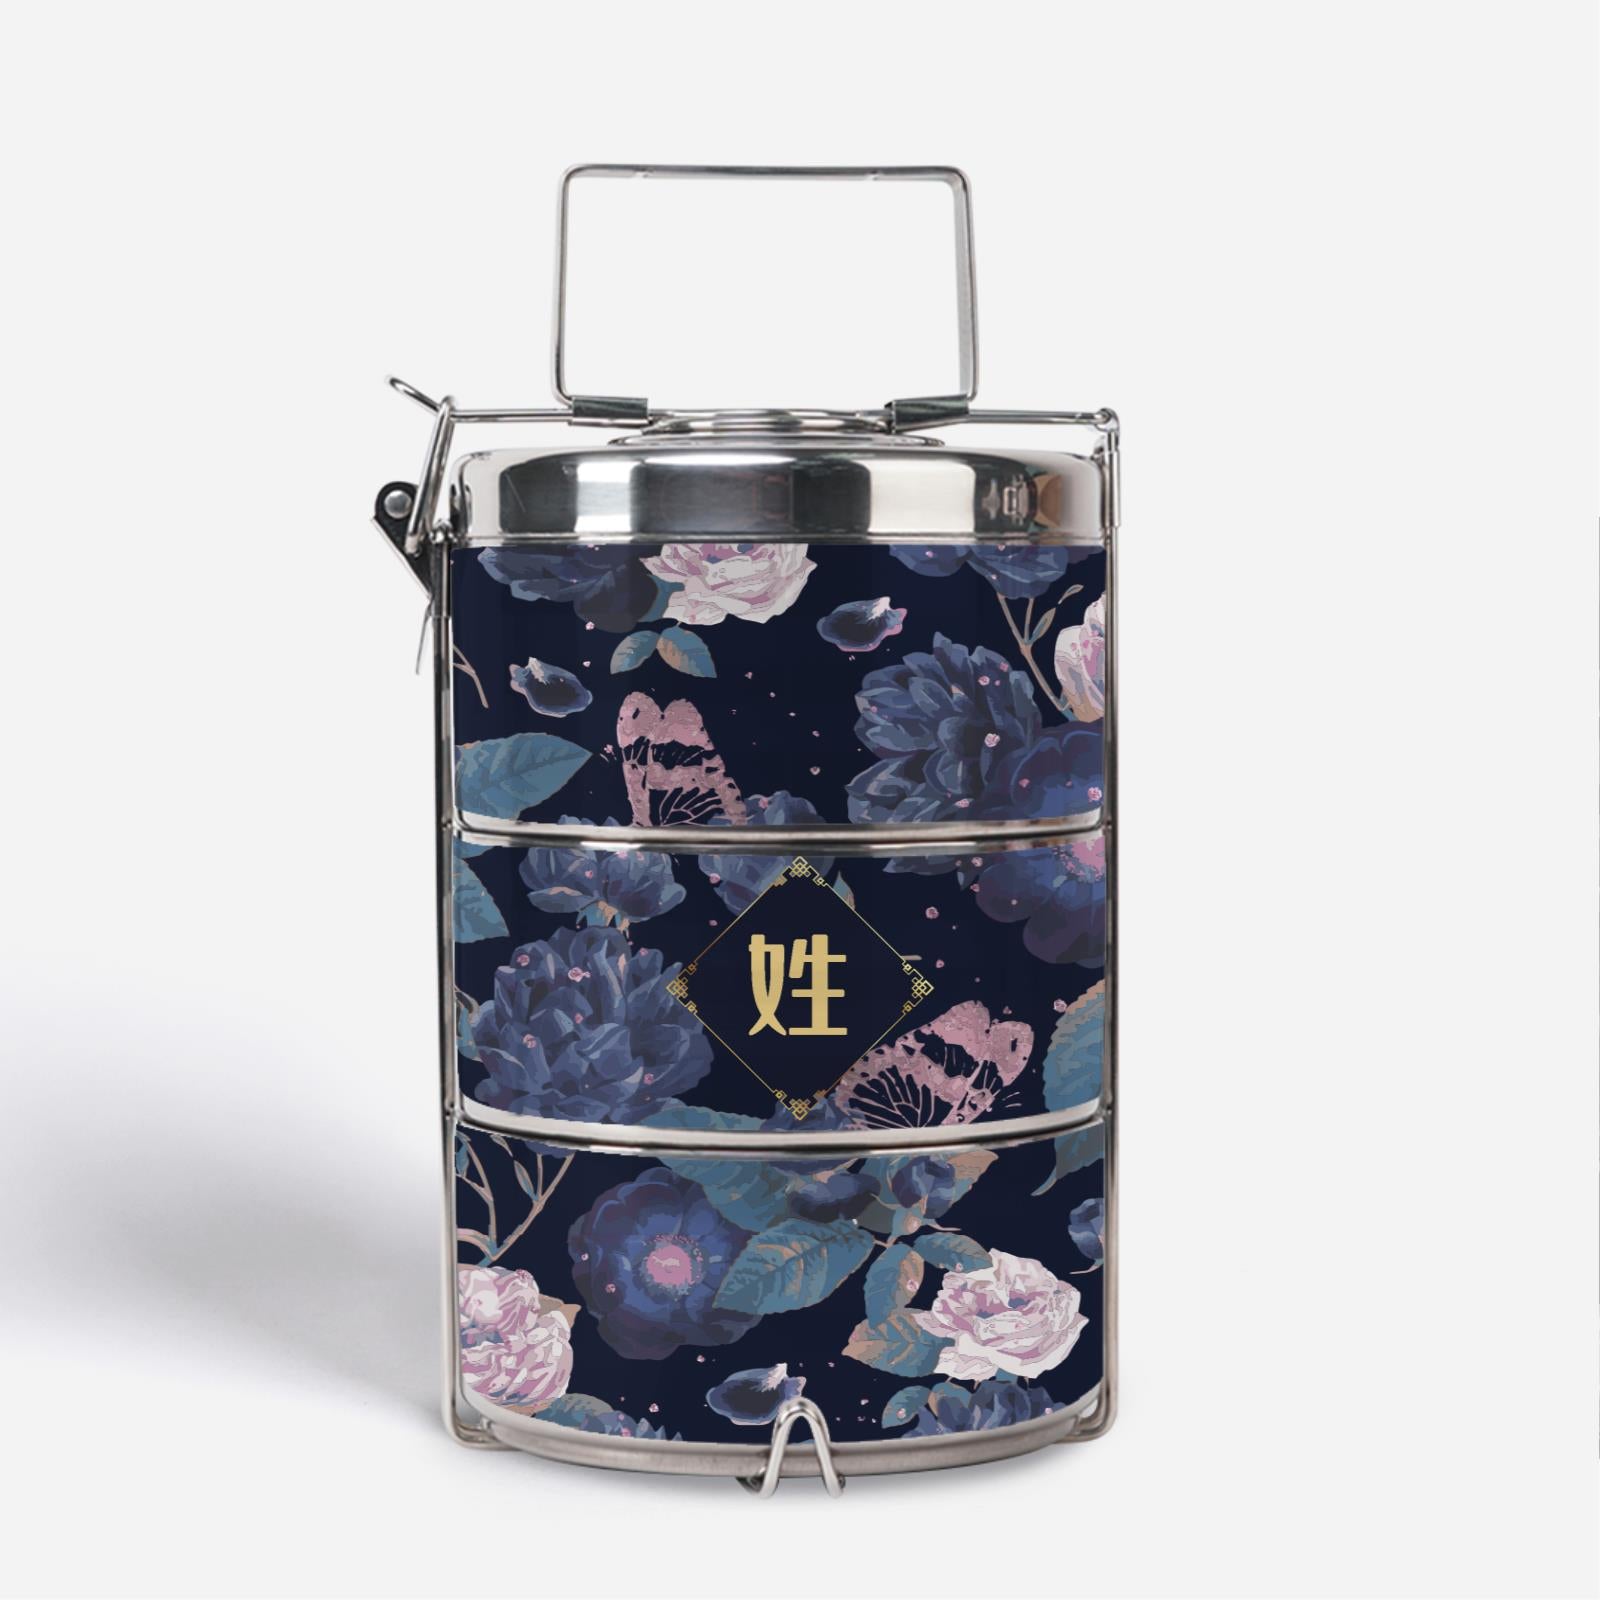 Royal Floral Series With Chinese Surname Premium Tiffin Carrier - Serene Moonlight